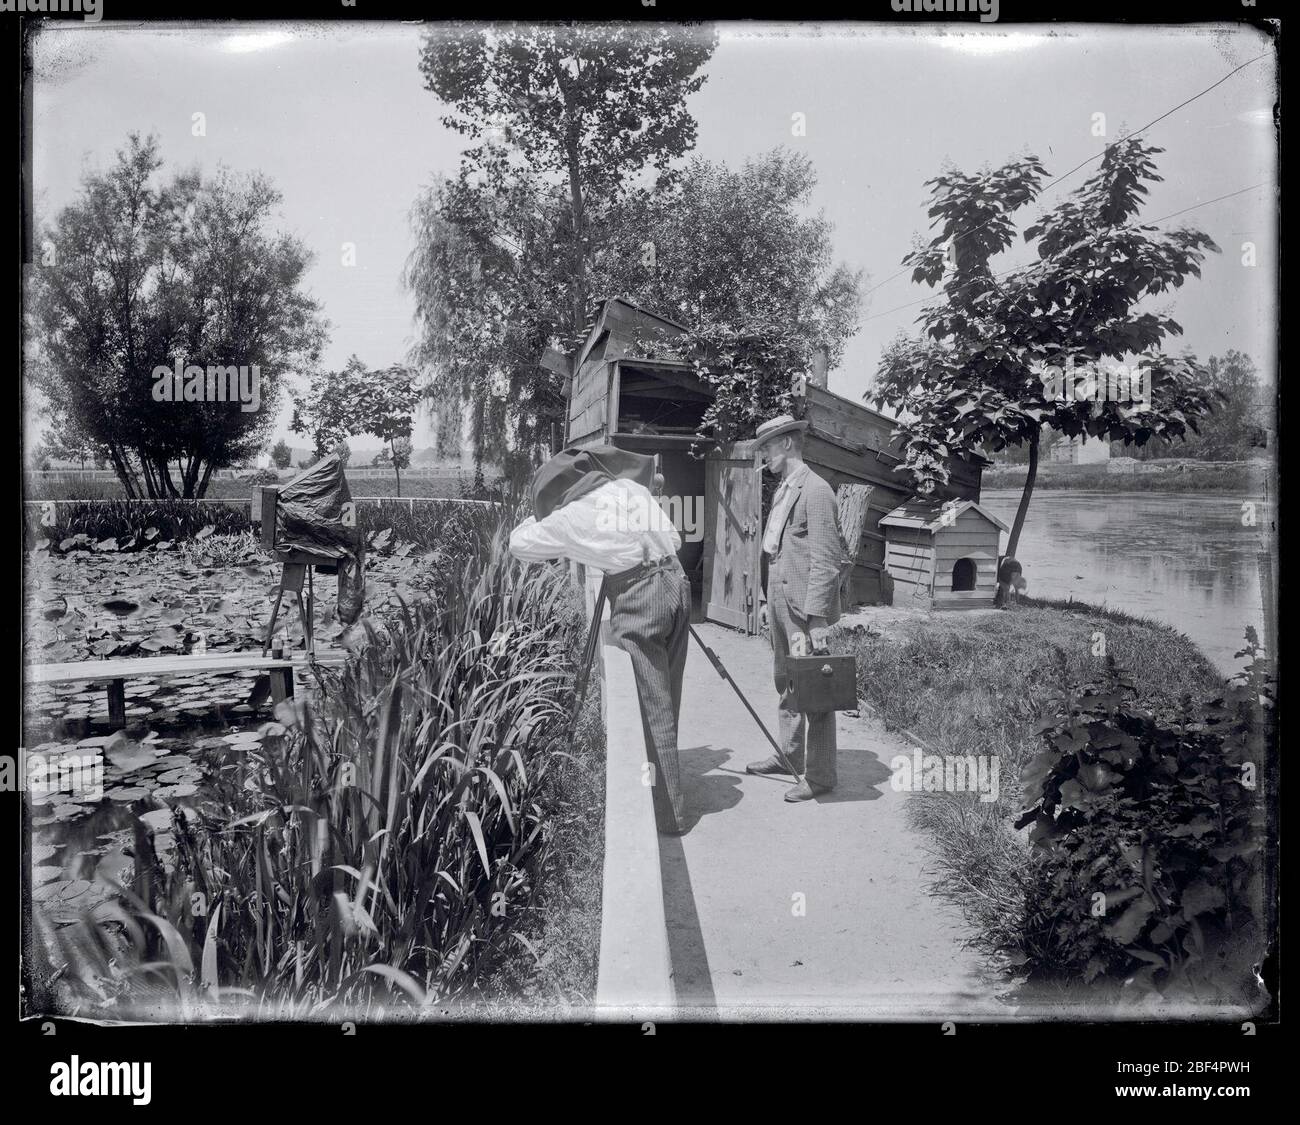 United States Fish Commission Hatchery Ponds. Two unidentified men with photographic equipment by the U.S. Fish Commission fish hatchery ponds for the production of carp, golden ide, and tench, located near the grounds of the Washington Monument.Smithsonian Institution Archives, Acc. 11-006, Box 014, Image No. Stock Photo